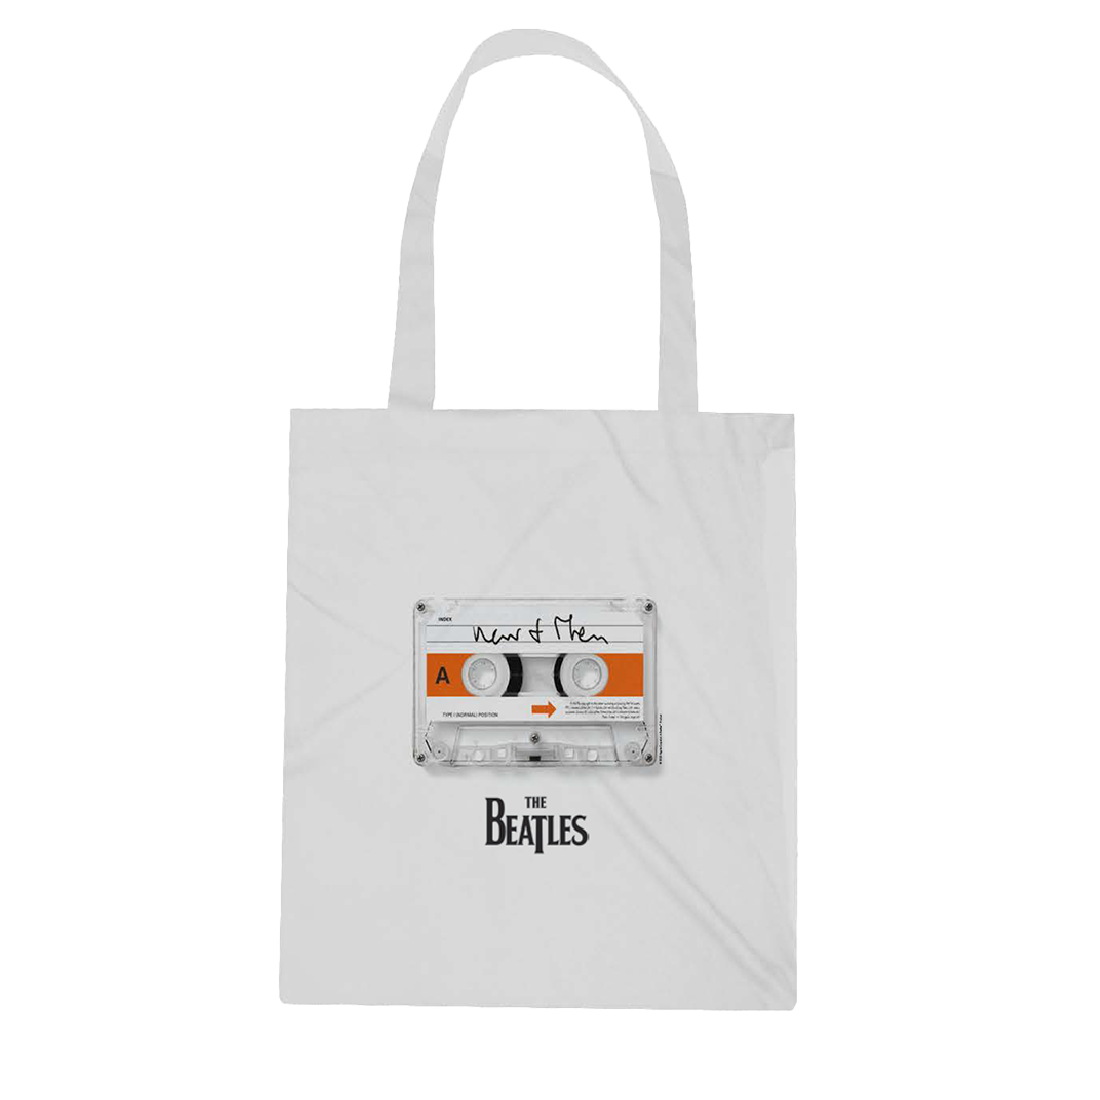 The Beatles - White Now & Then Tote Bag